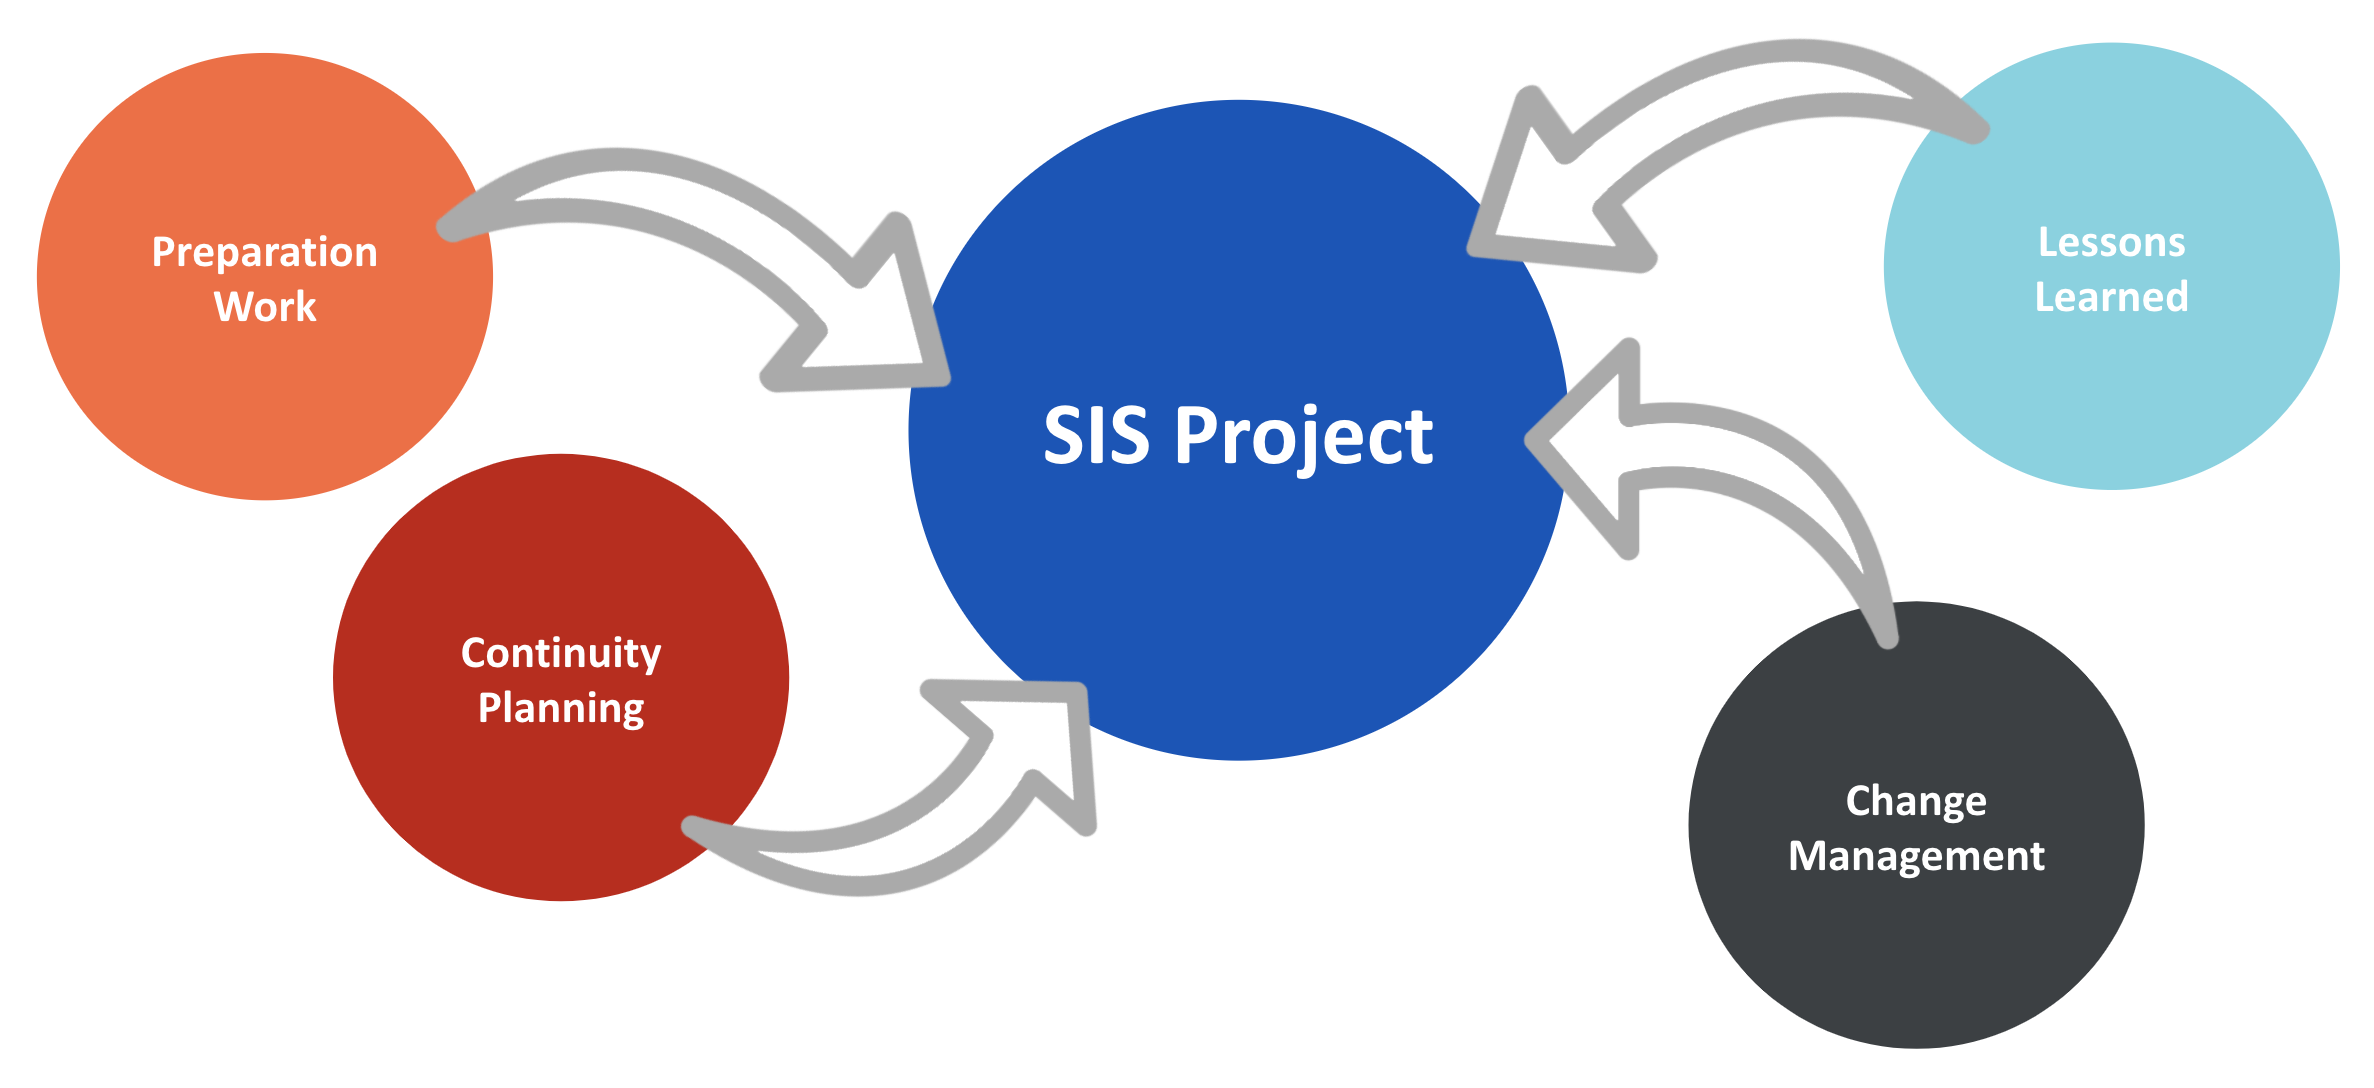 Image with SIS Project in the center and preparation work, continuity planning, lessons learned, and change management surrounding it.